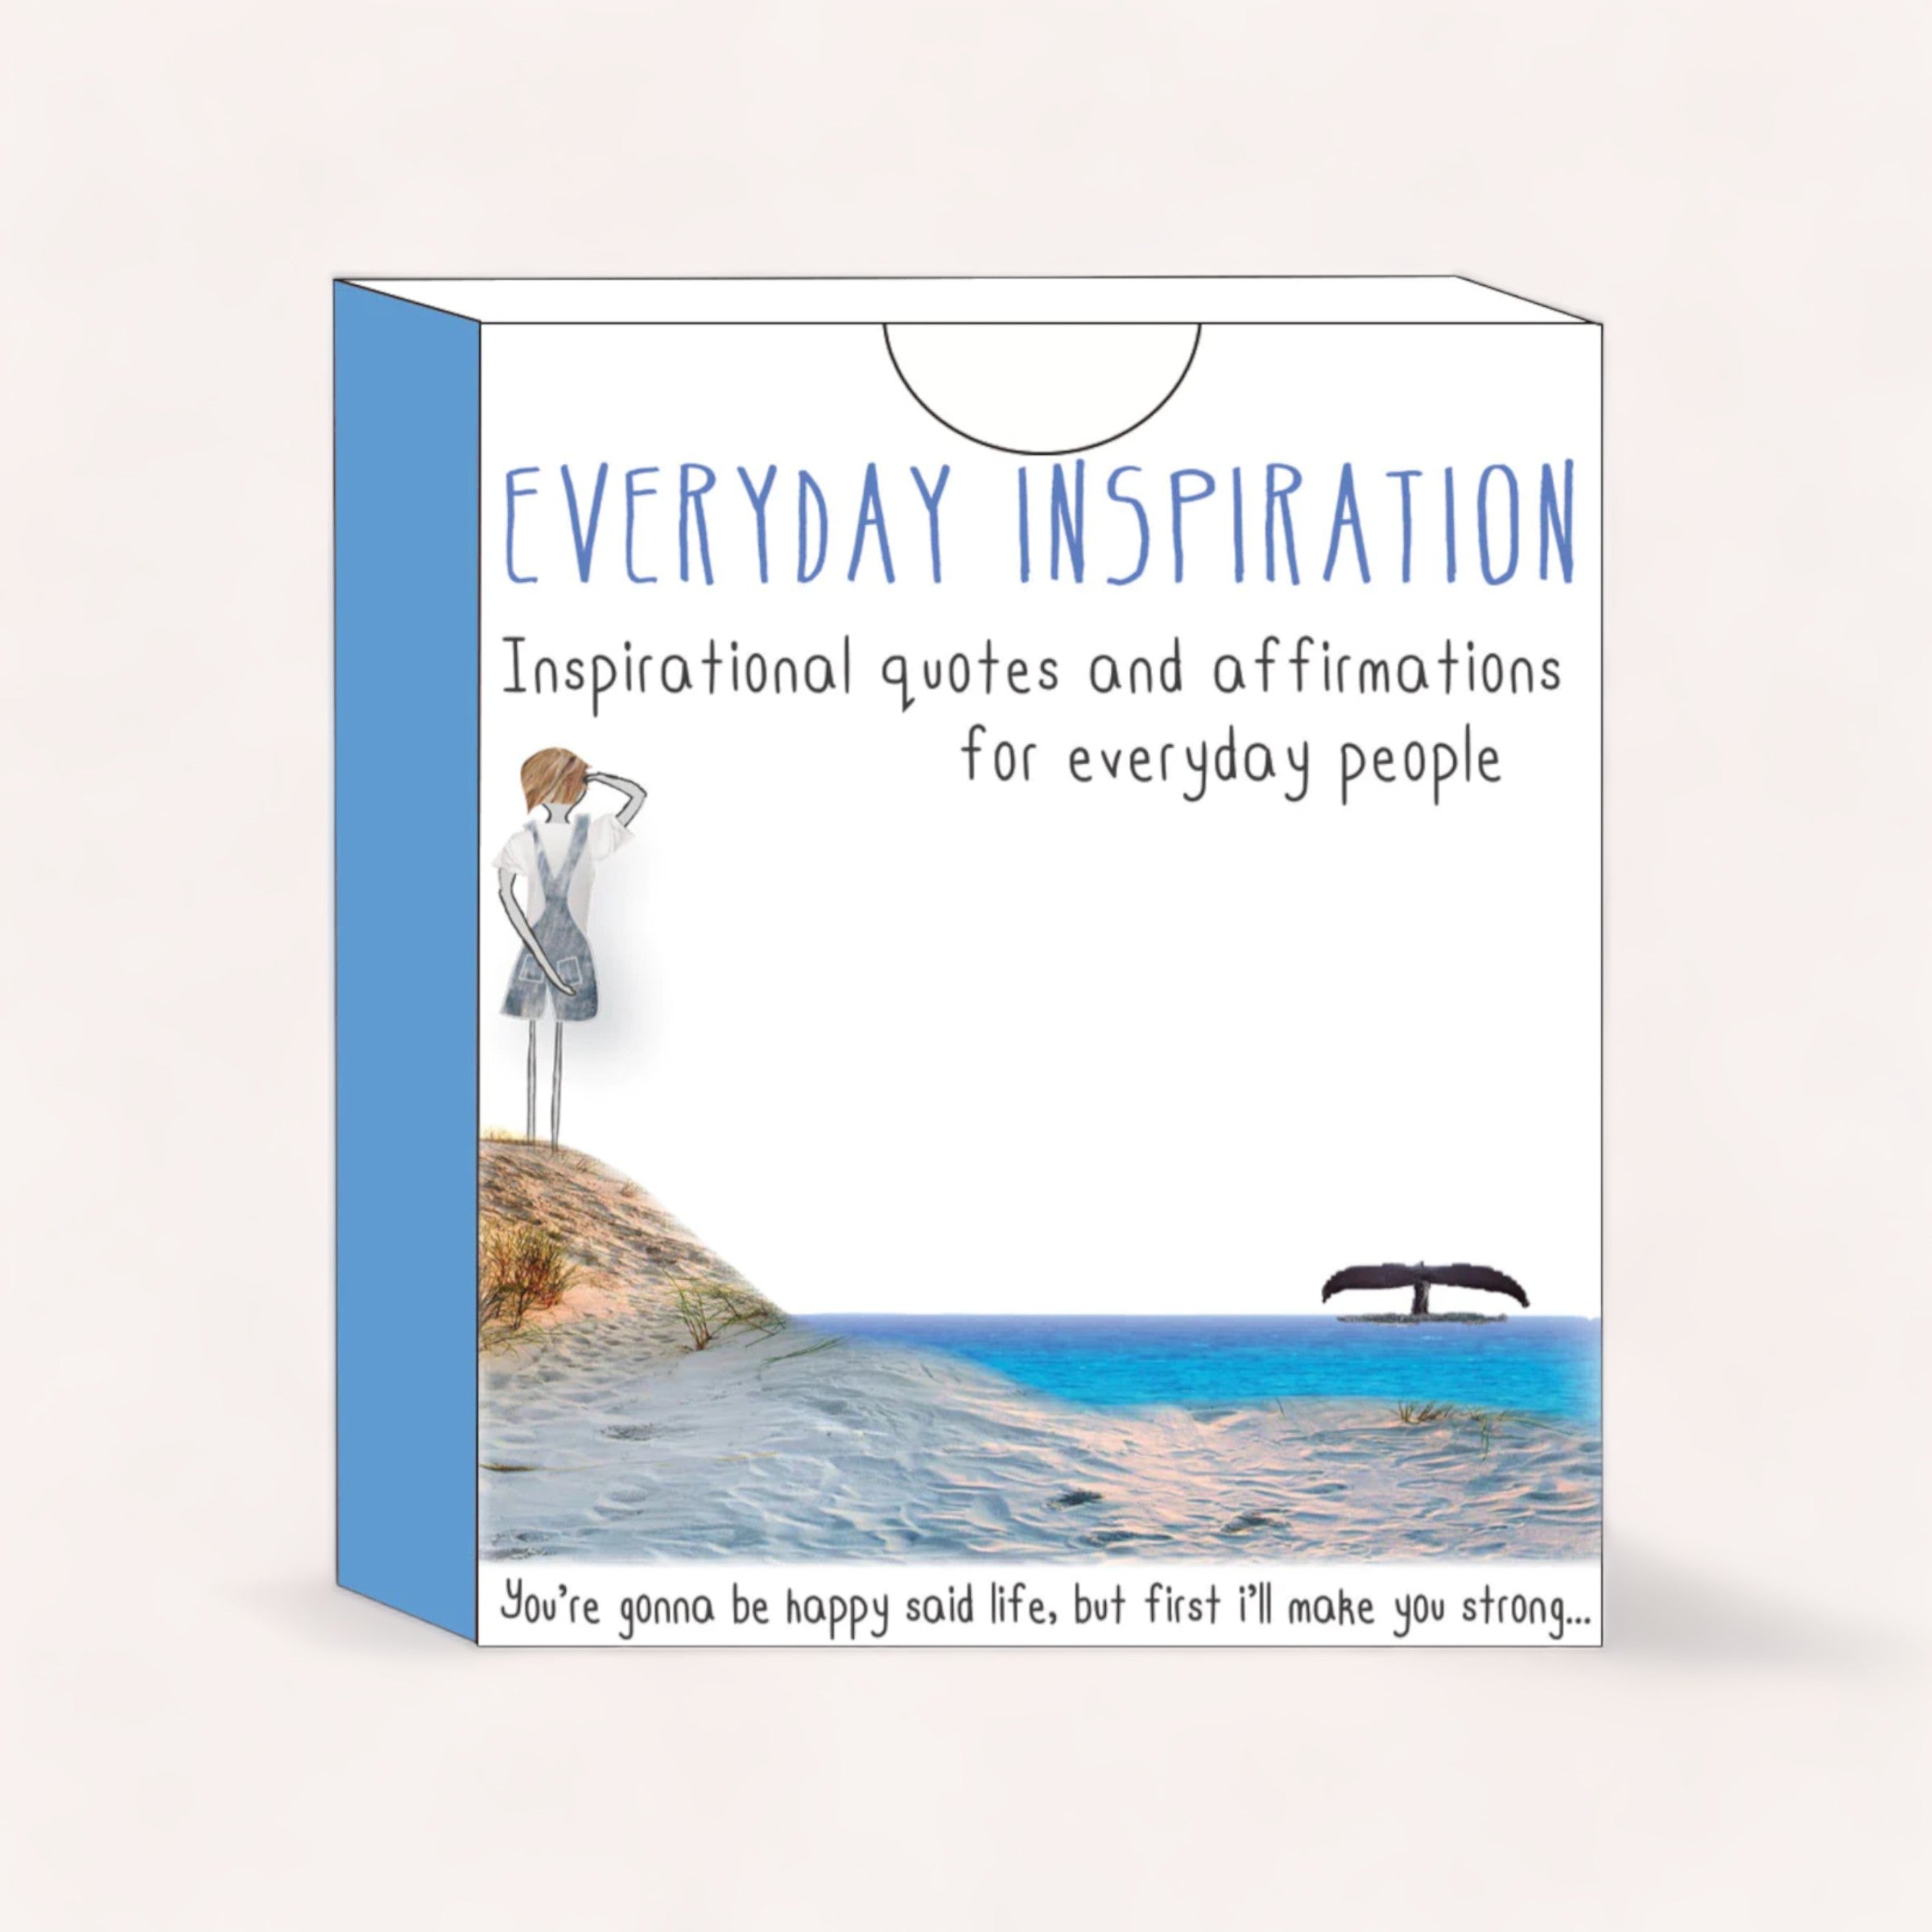 A book with a tranquil cover design featuring the title "Everyday Inspiration - Positivity Pack," with an image of a person standing on a cliff overlooking the ocean by icandy.